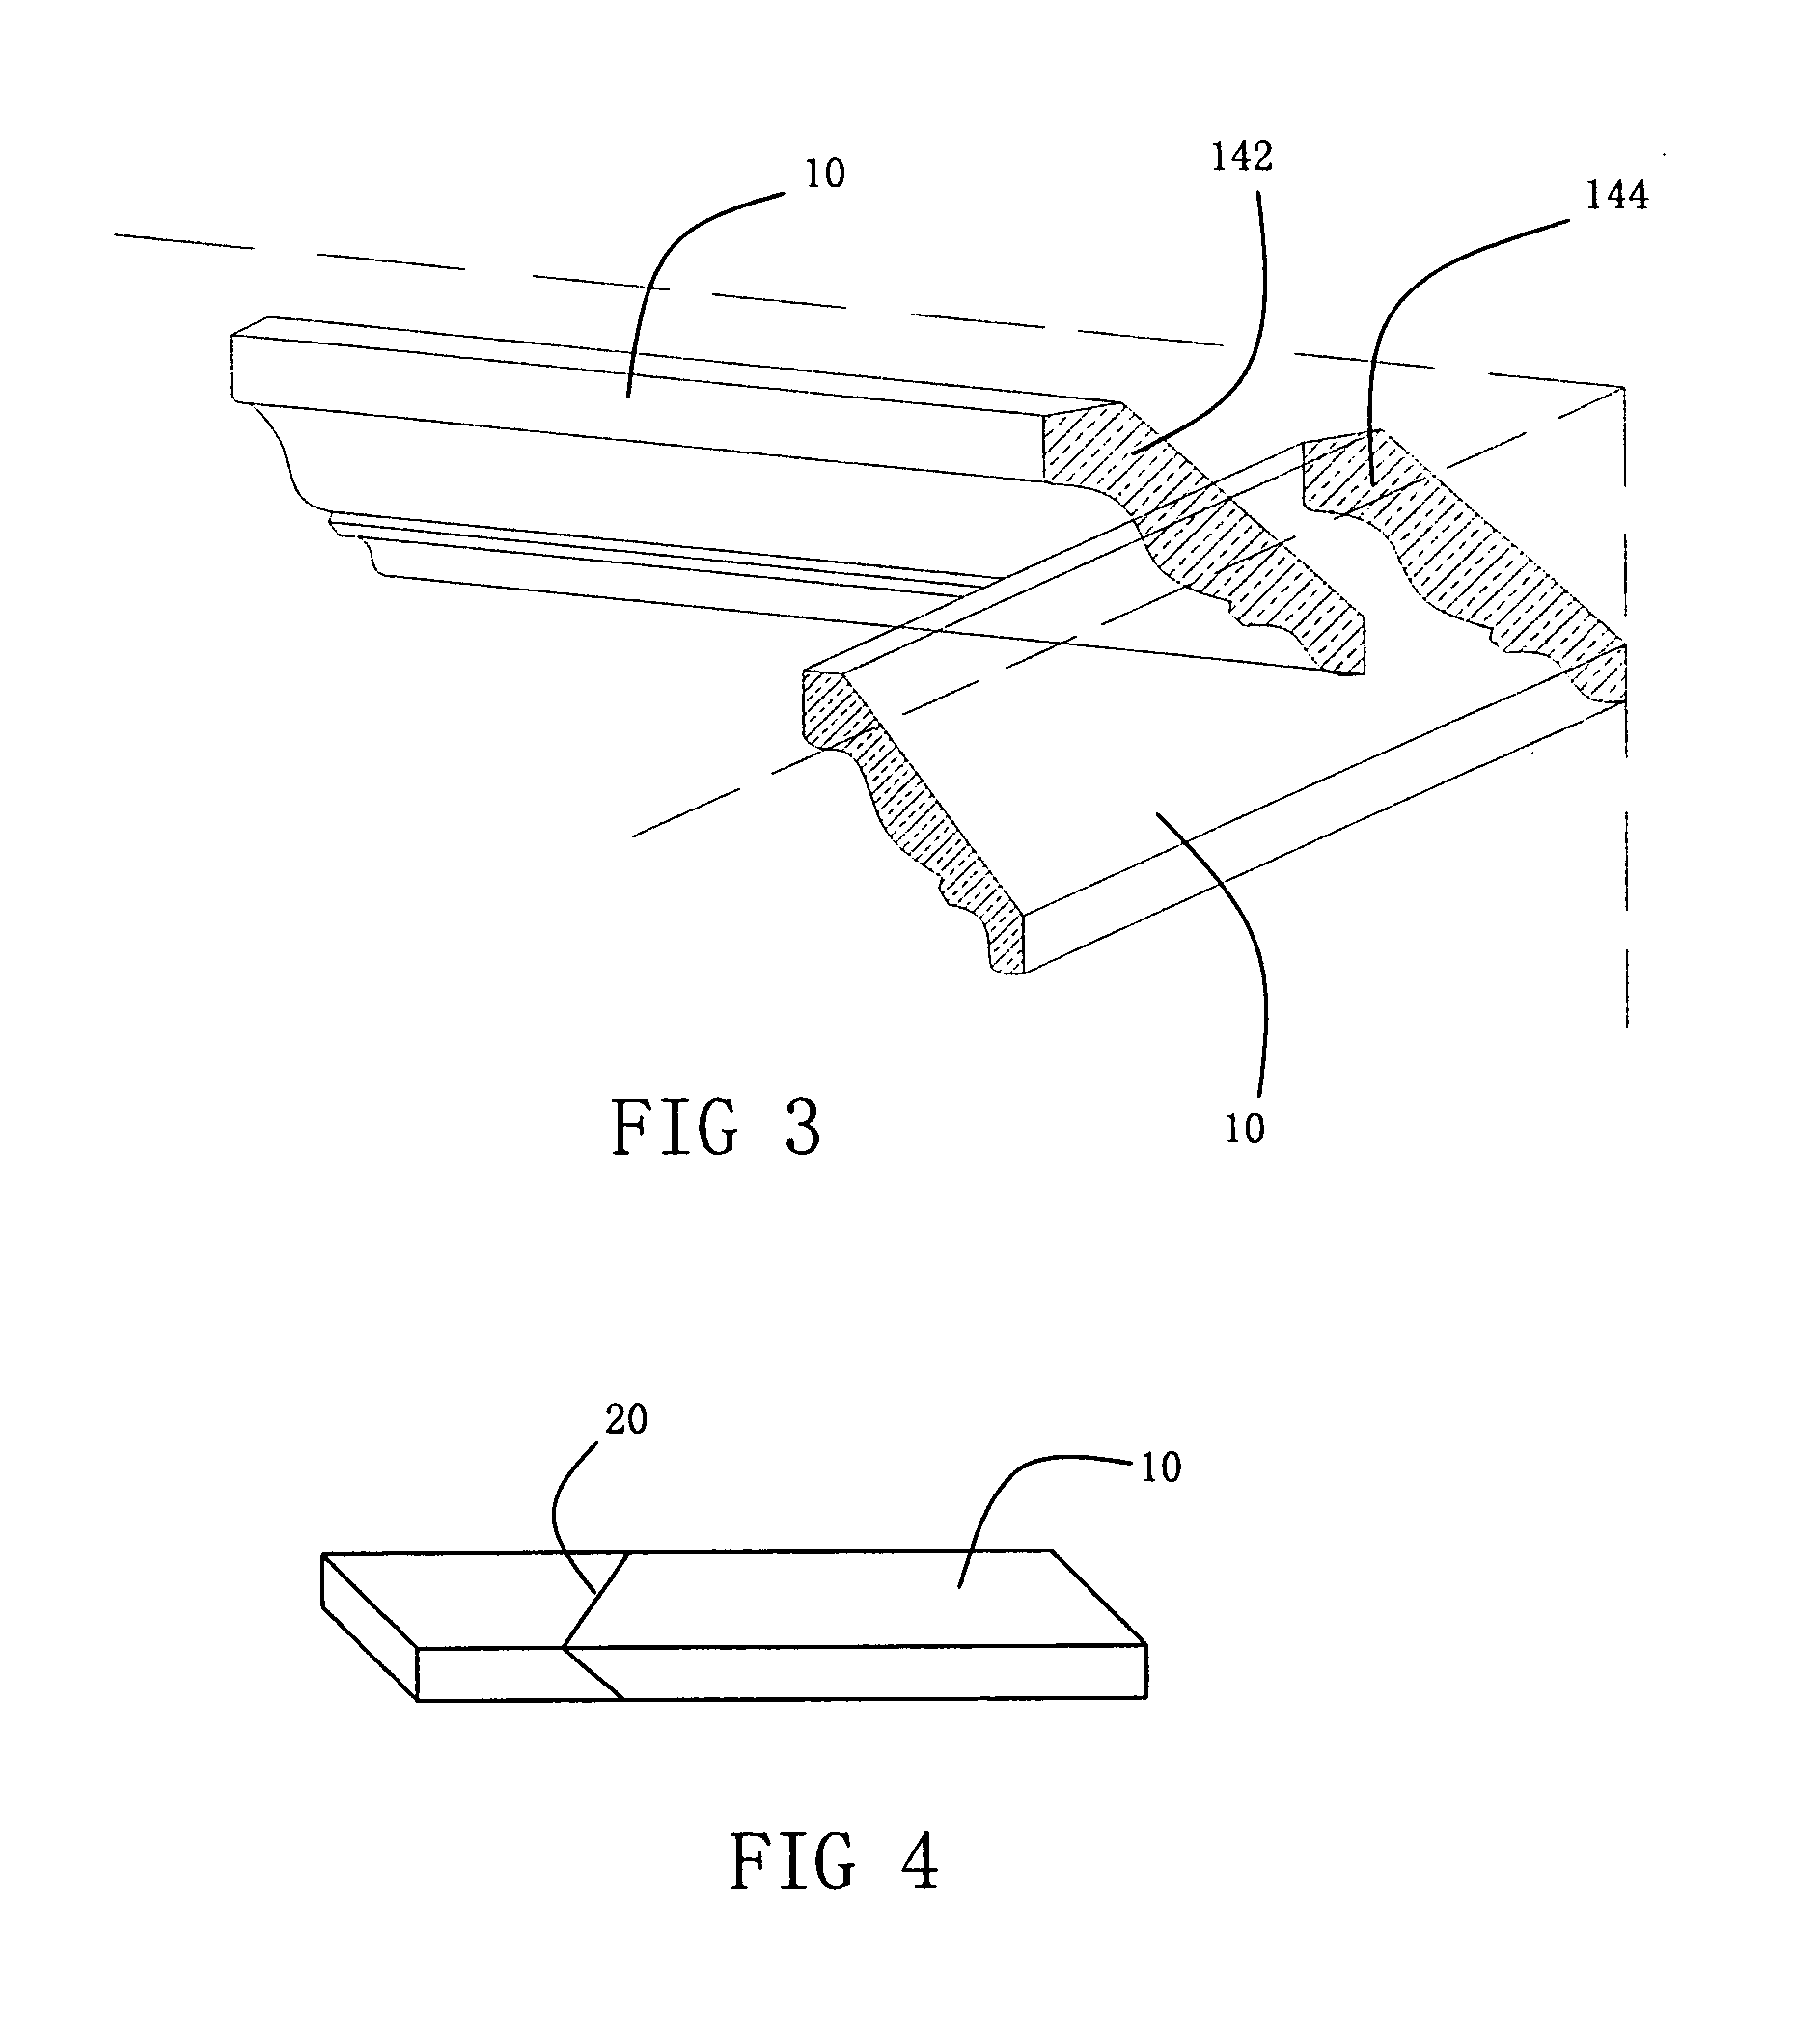 Device for positioning a workpiece to be cut and a method of using the same